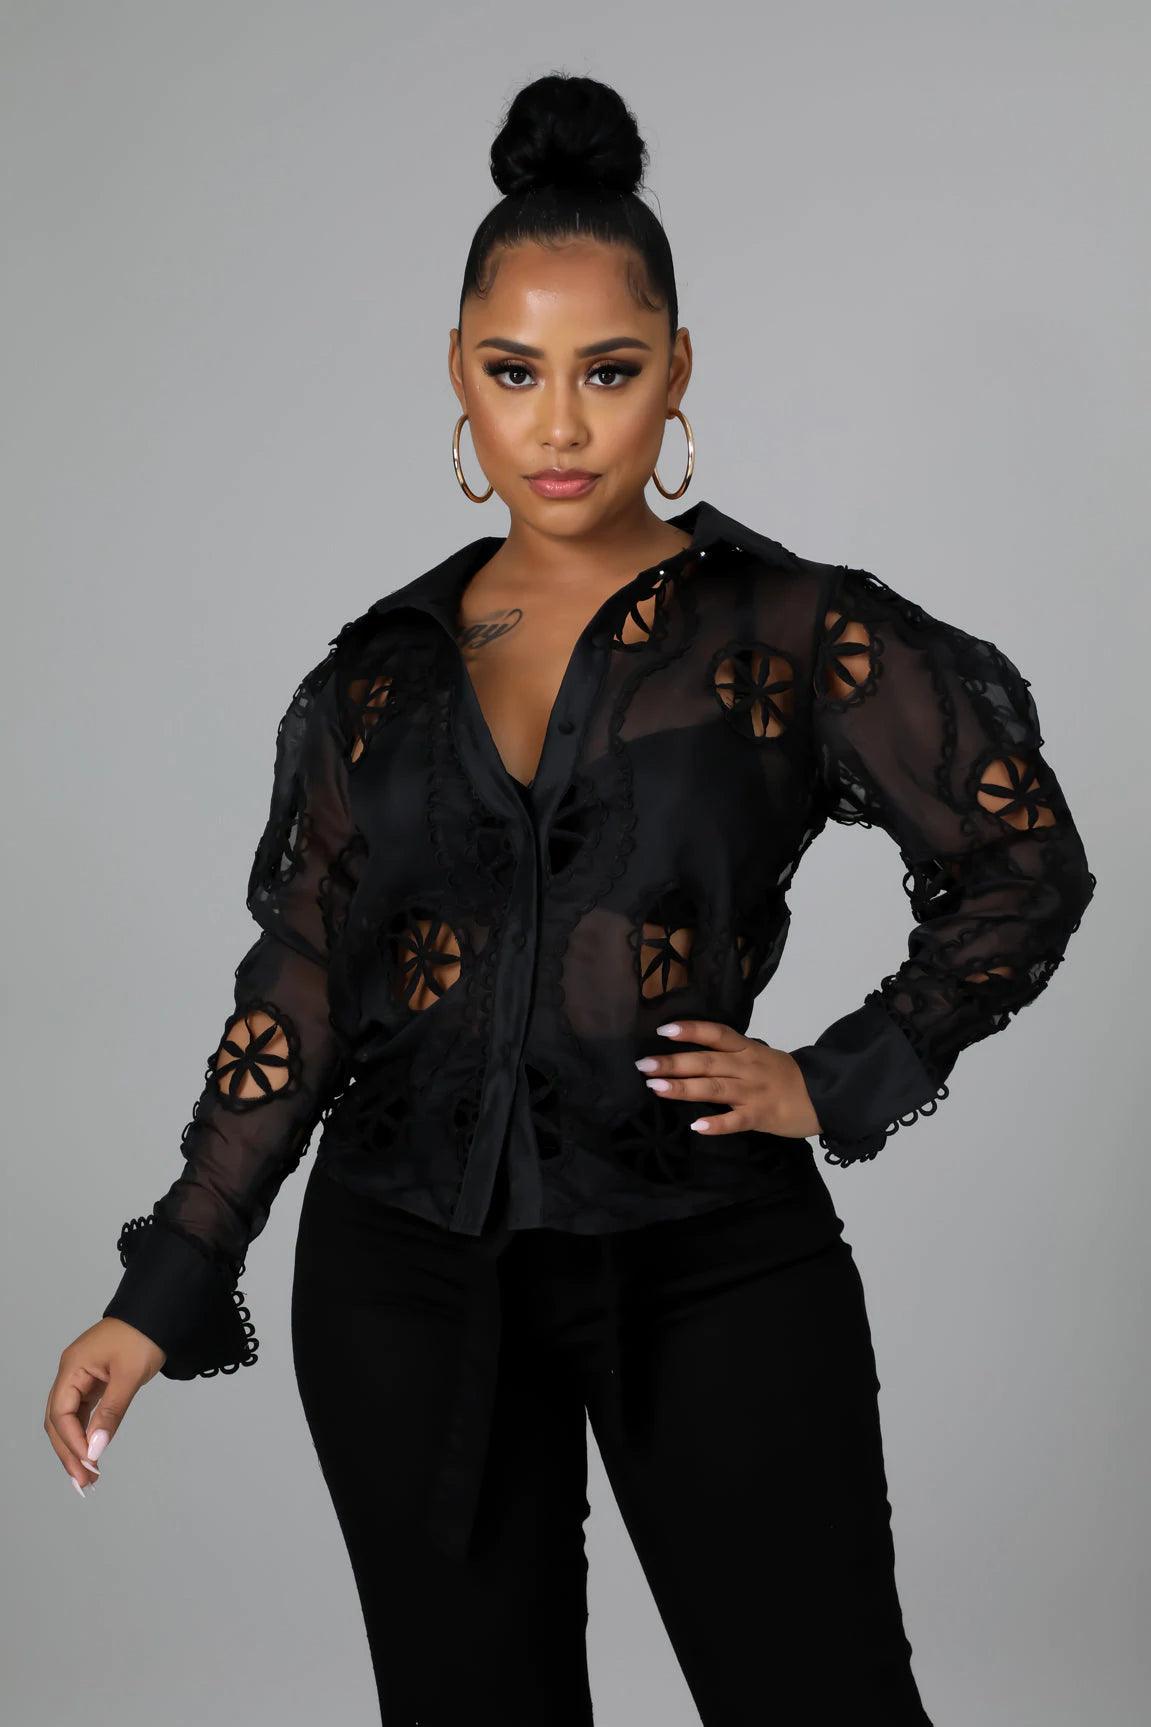 Naomi Sophisticated Boutique Top - MY SEXY STYLES